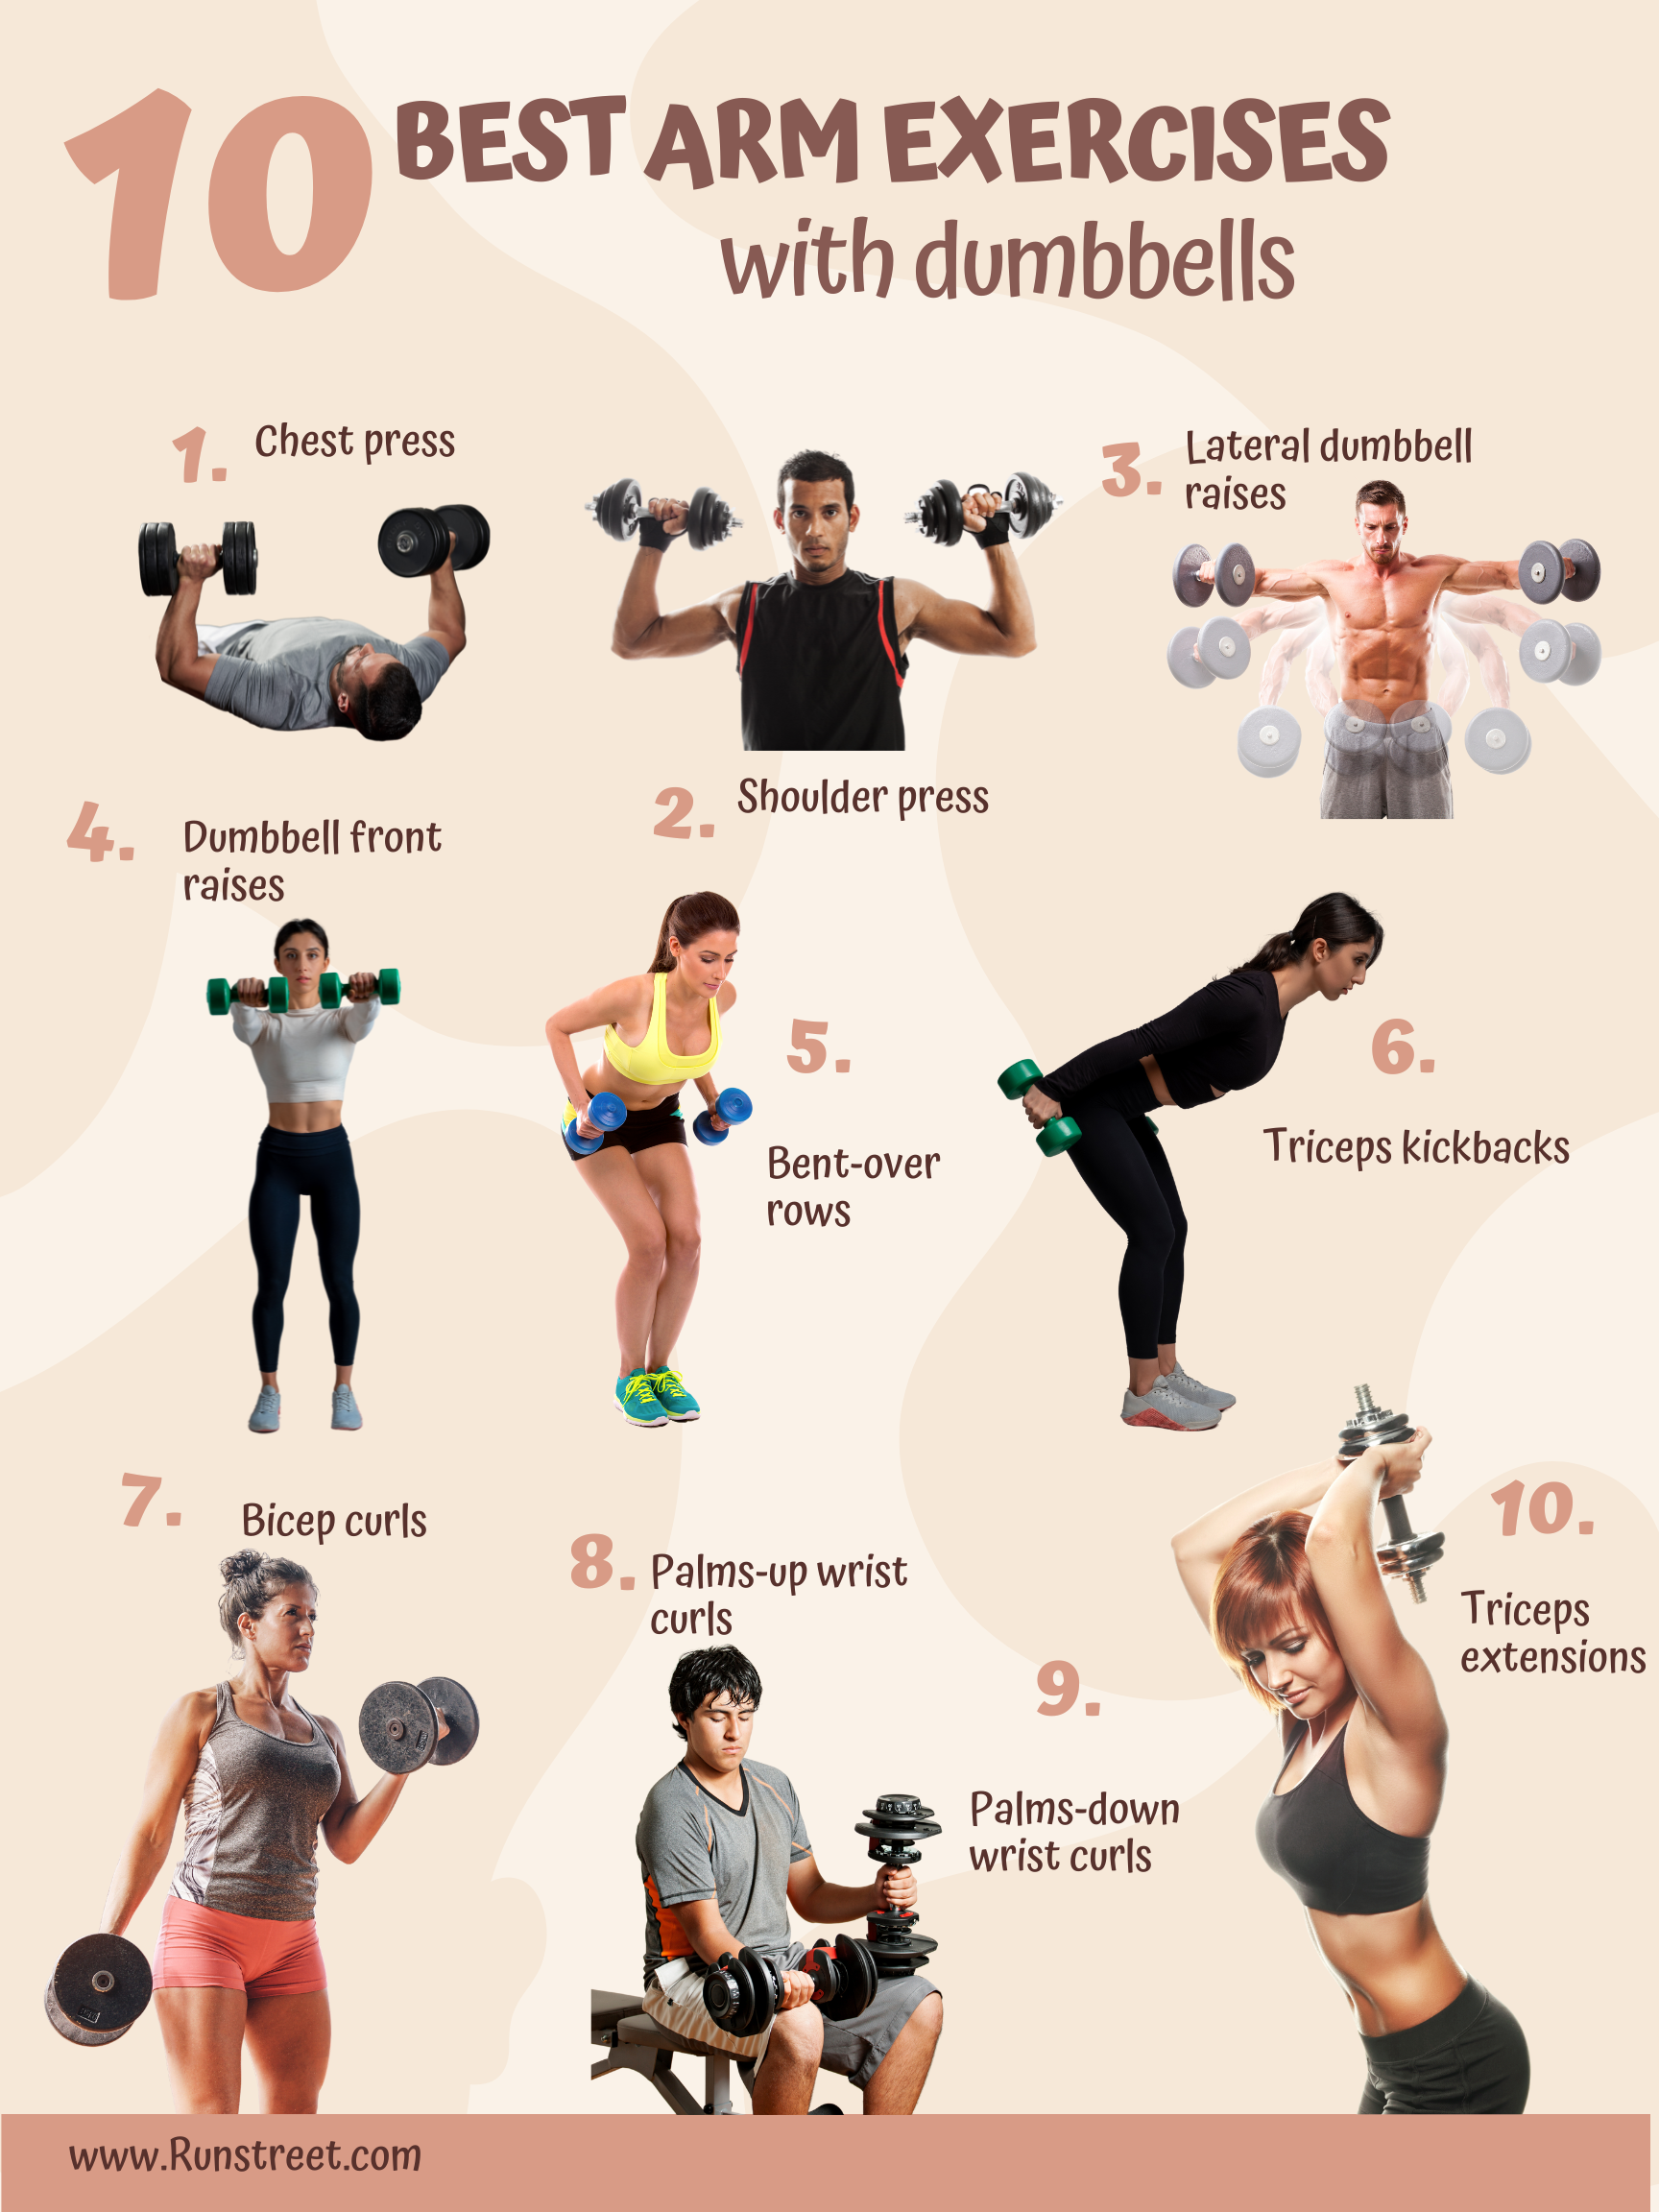 10 Best Arm Workouts with Dumbbells to Sculpt Your Arms — Runstreet